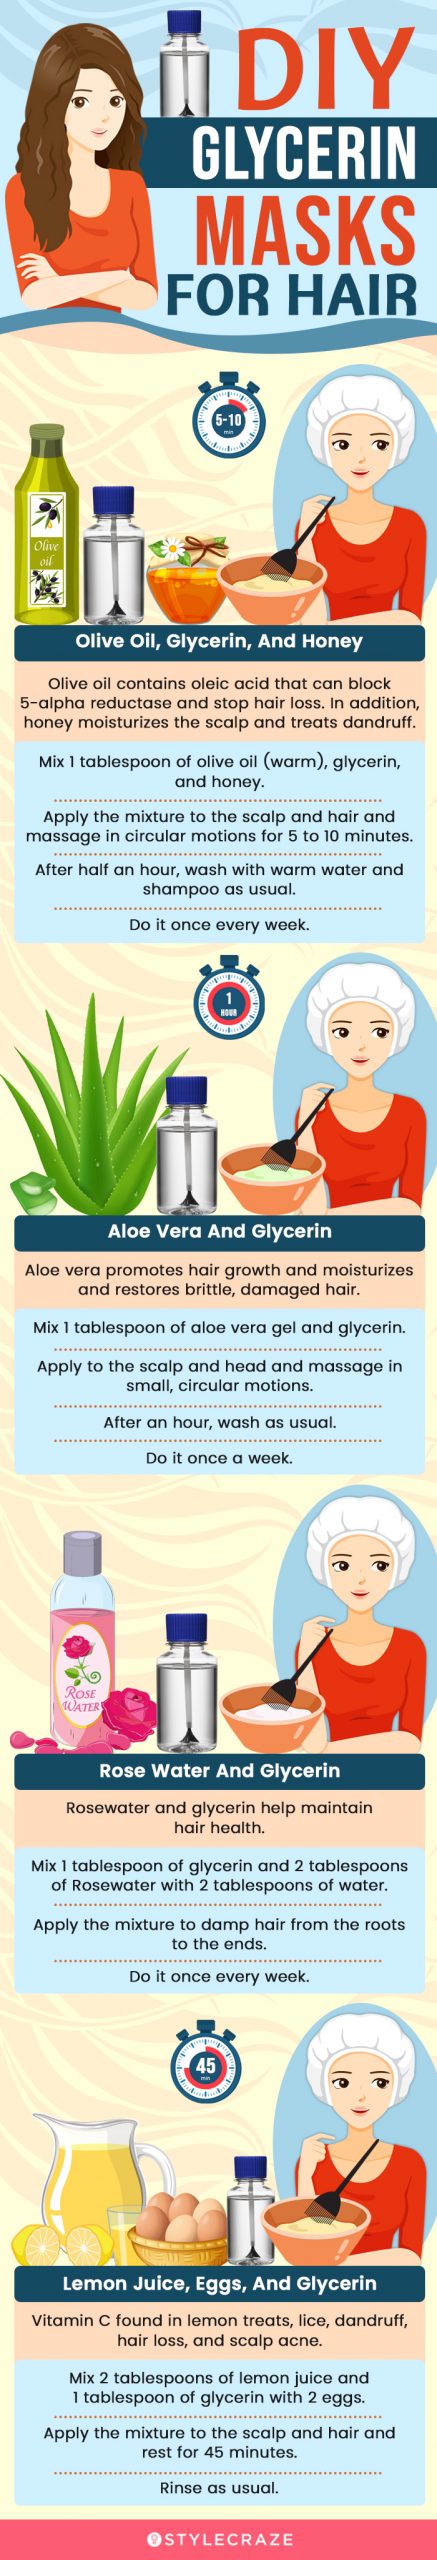 Glycerin For Hair: Benefits And How To Apply